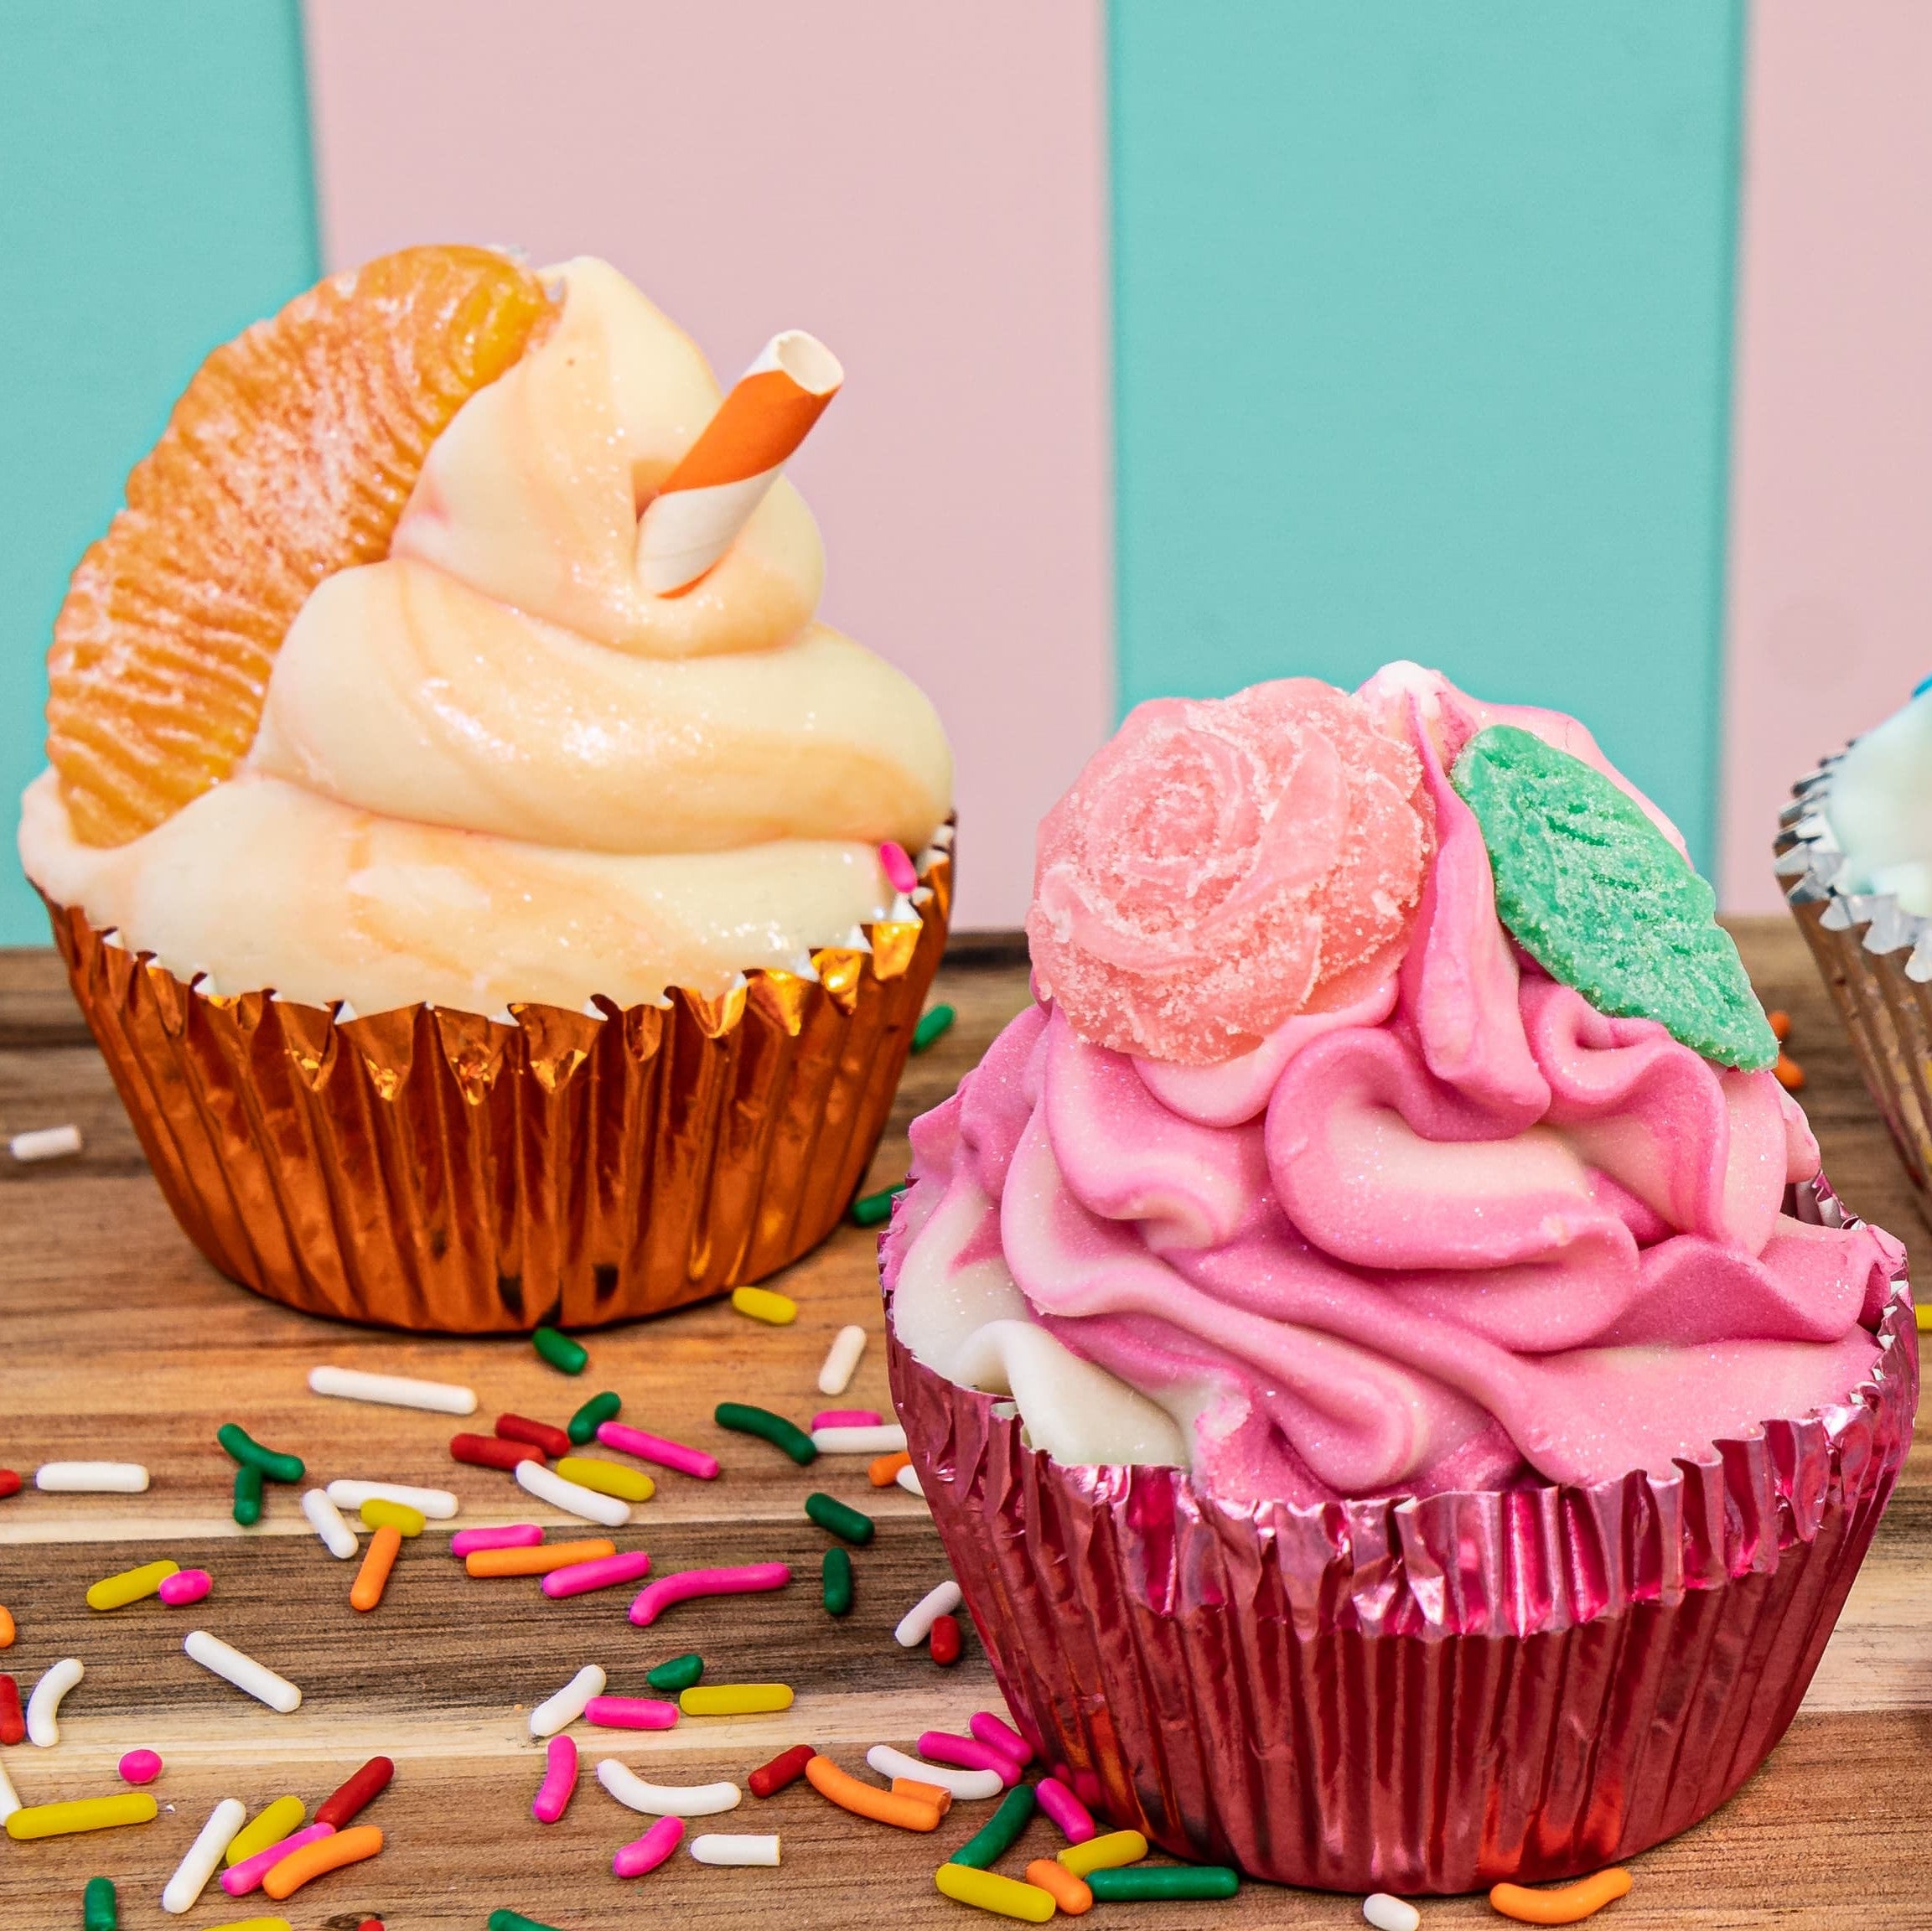 Two cupcake shaped soaps.